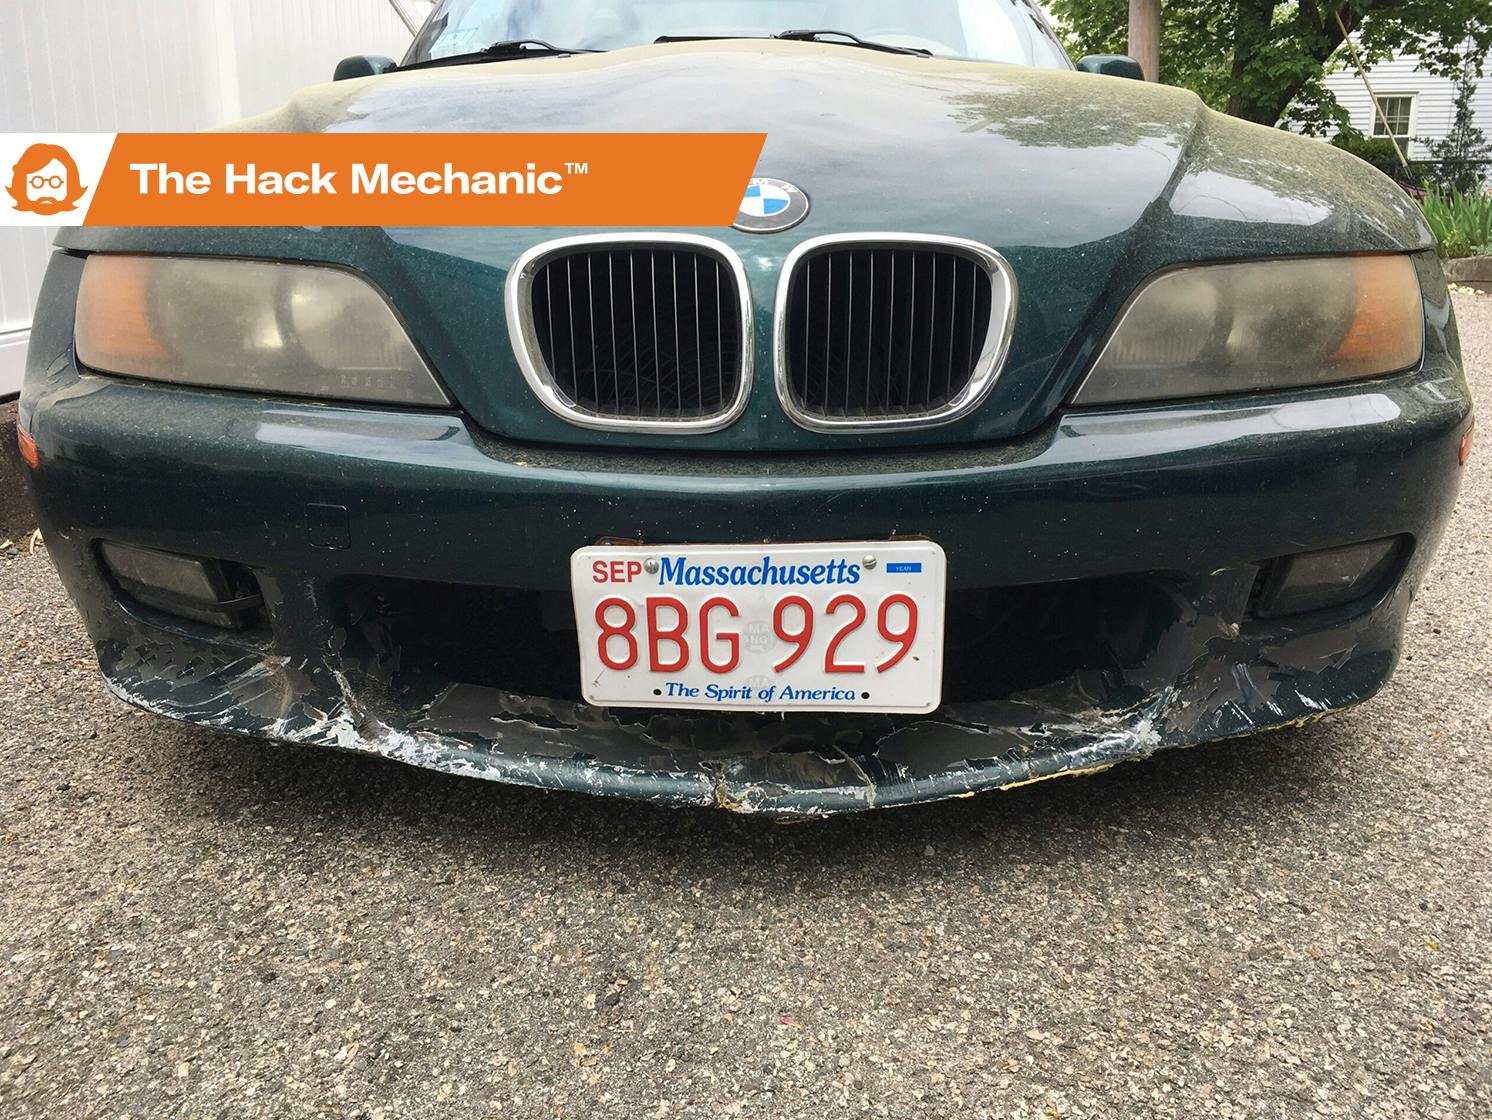 Damaged front bumper cover and grill : r/Detailing